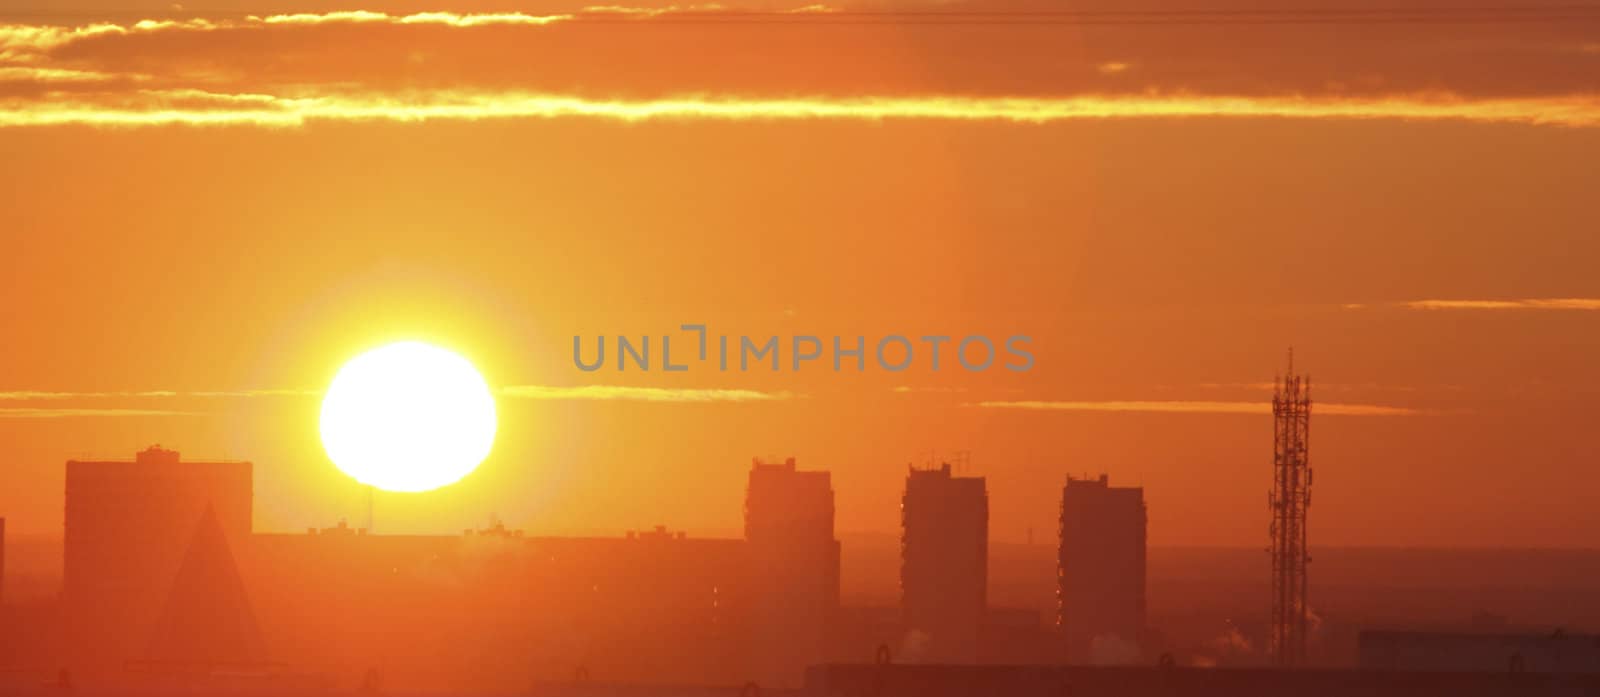 The Yellow sunrise on matutinal city with silhouette of the alive houses.